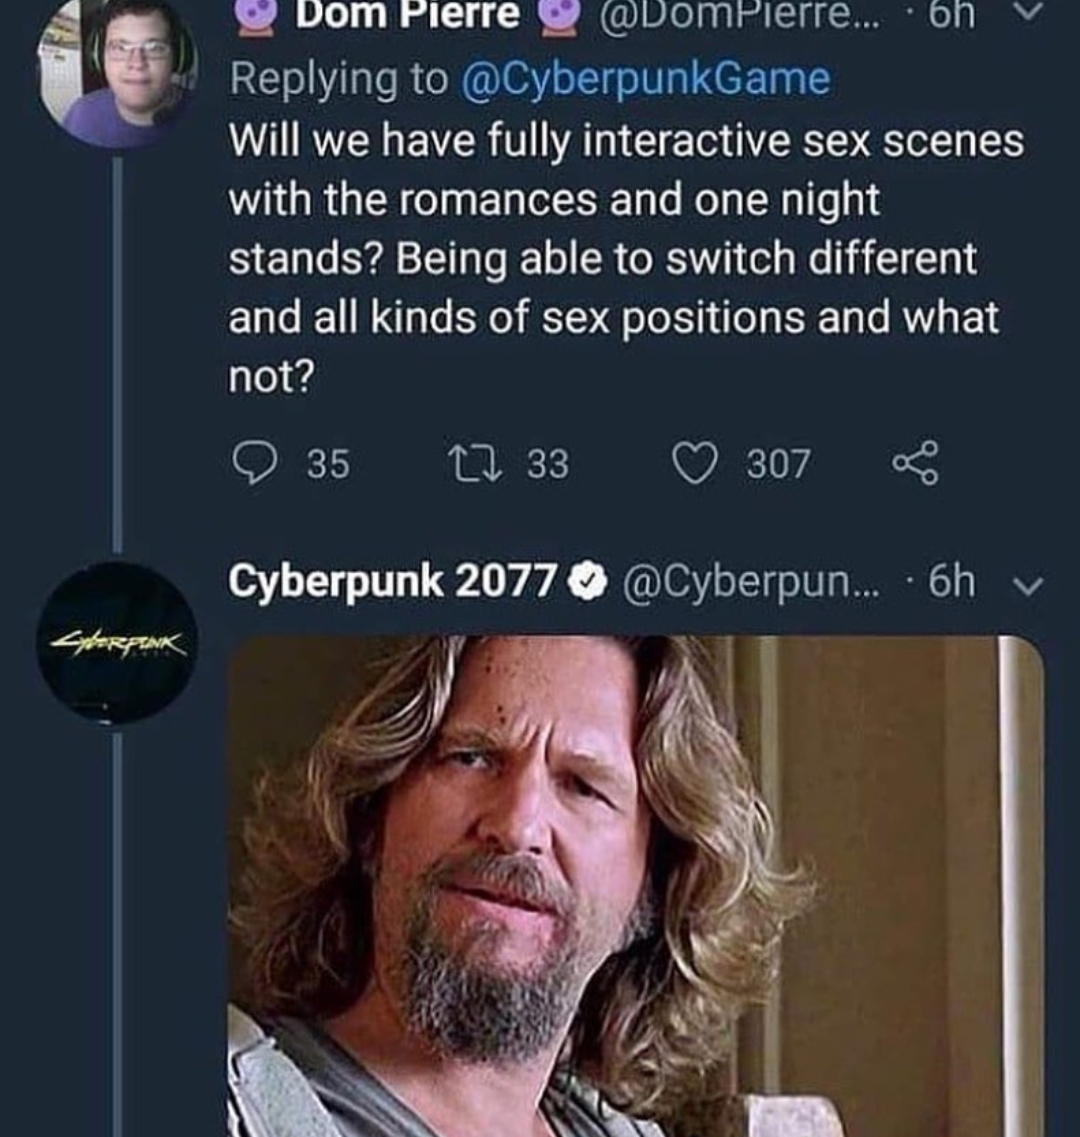 big lebowski white russian - Bom Pierre DomPierre.... 6h Will we have fully interactive sex scenes with the romances and one night stands? Being able to switch different and all kinds of sex positions and what not? 35 22 33 0 307 Cyberpunk 2077 @ Cyberpun